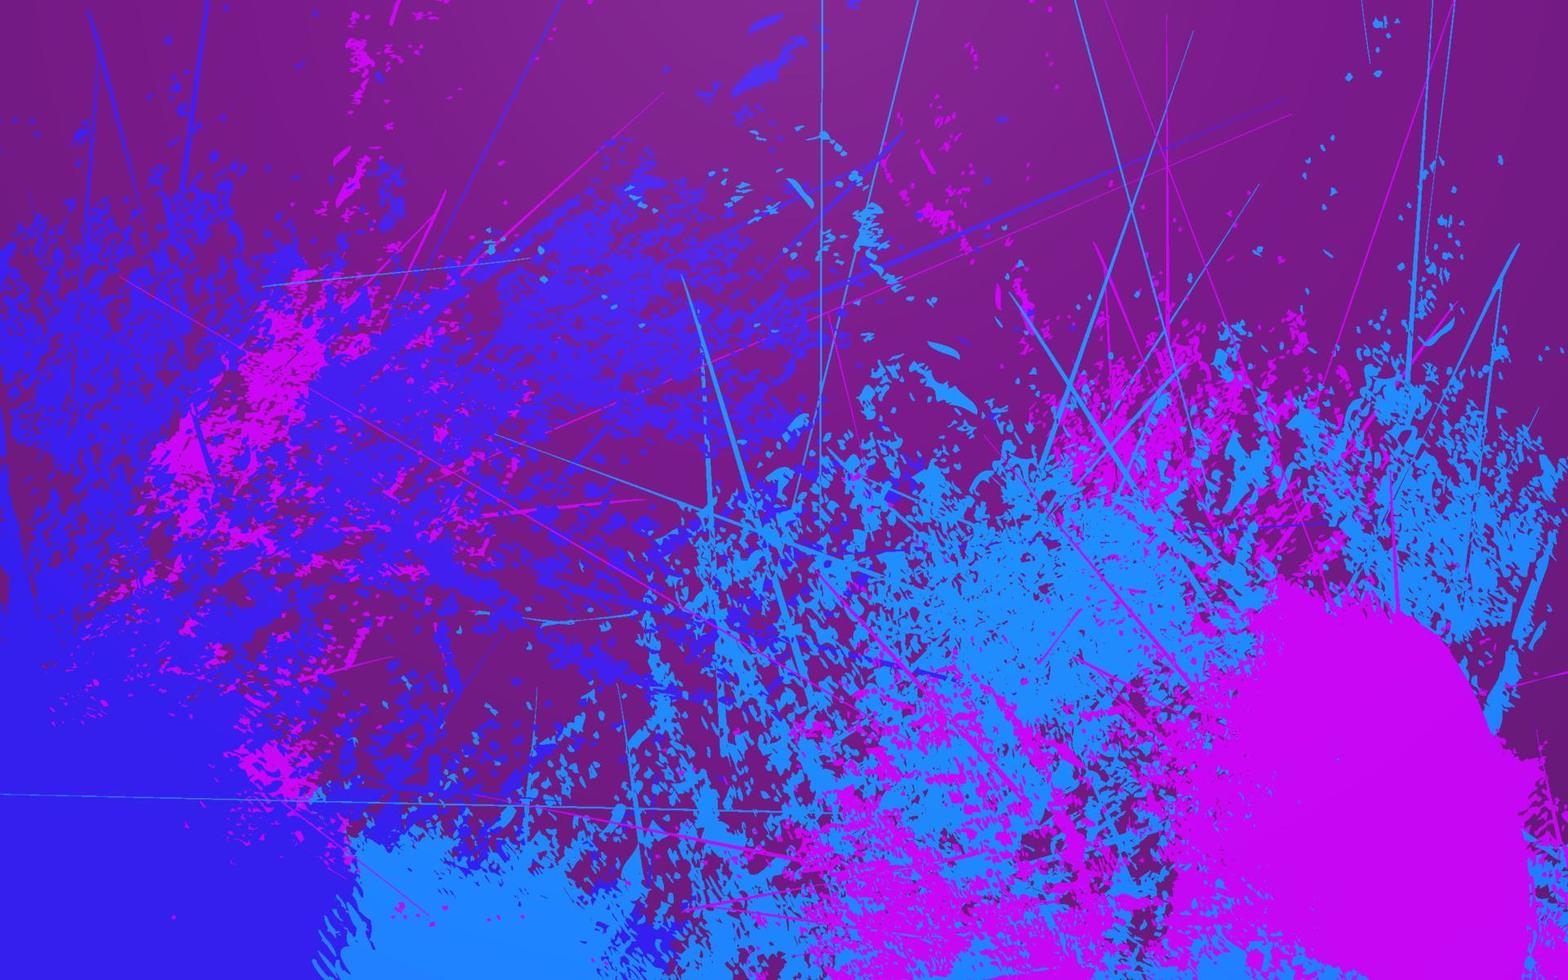 Abstract grunge texture blue purple background vector